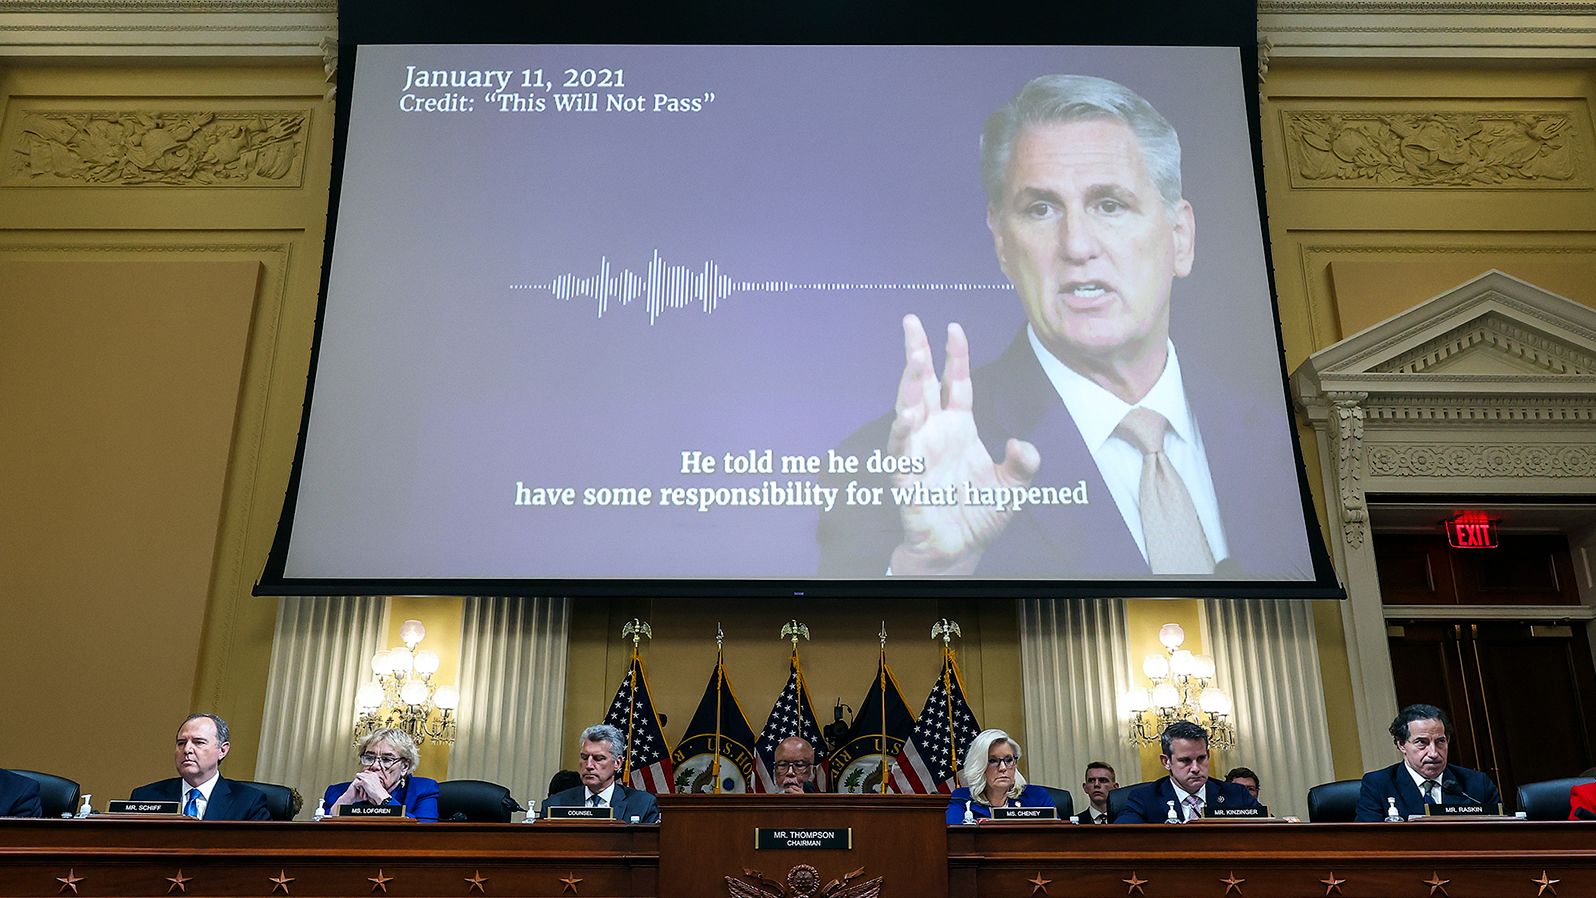 An audio recording of McCarthy is played in October 2022 during a hearing of the House Select Committee investigating the January 6 attack. "Let me be very clear to you and I have been very clear to the President. He bears responsibility for his words and actions. No if, ands or buts," McCarthy told House Republicans on January 11, 2021, <a href="https://www.cnn.com/2022/04/22/politics/trump-january-6-responsibility-book" target="_blank">according to the audio obtained by CNN</a>. "I asked him personally today, does he hold responsibility for what happened? Does he feel bad about what happened? He told me he does have some responsibility for what happened. And he needs to acknowledge that."